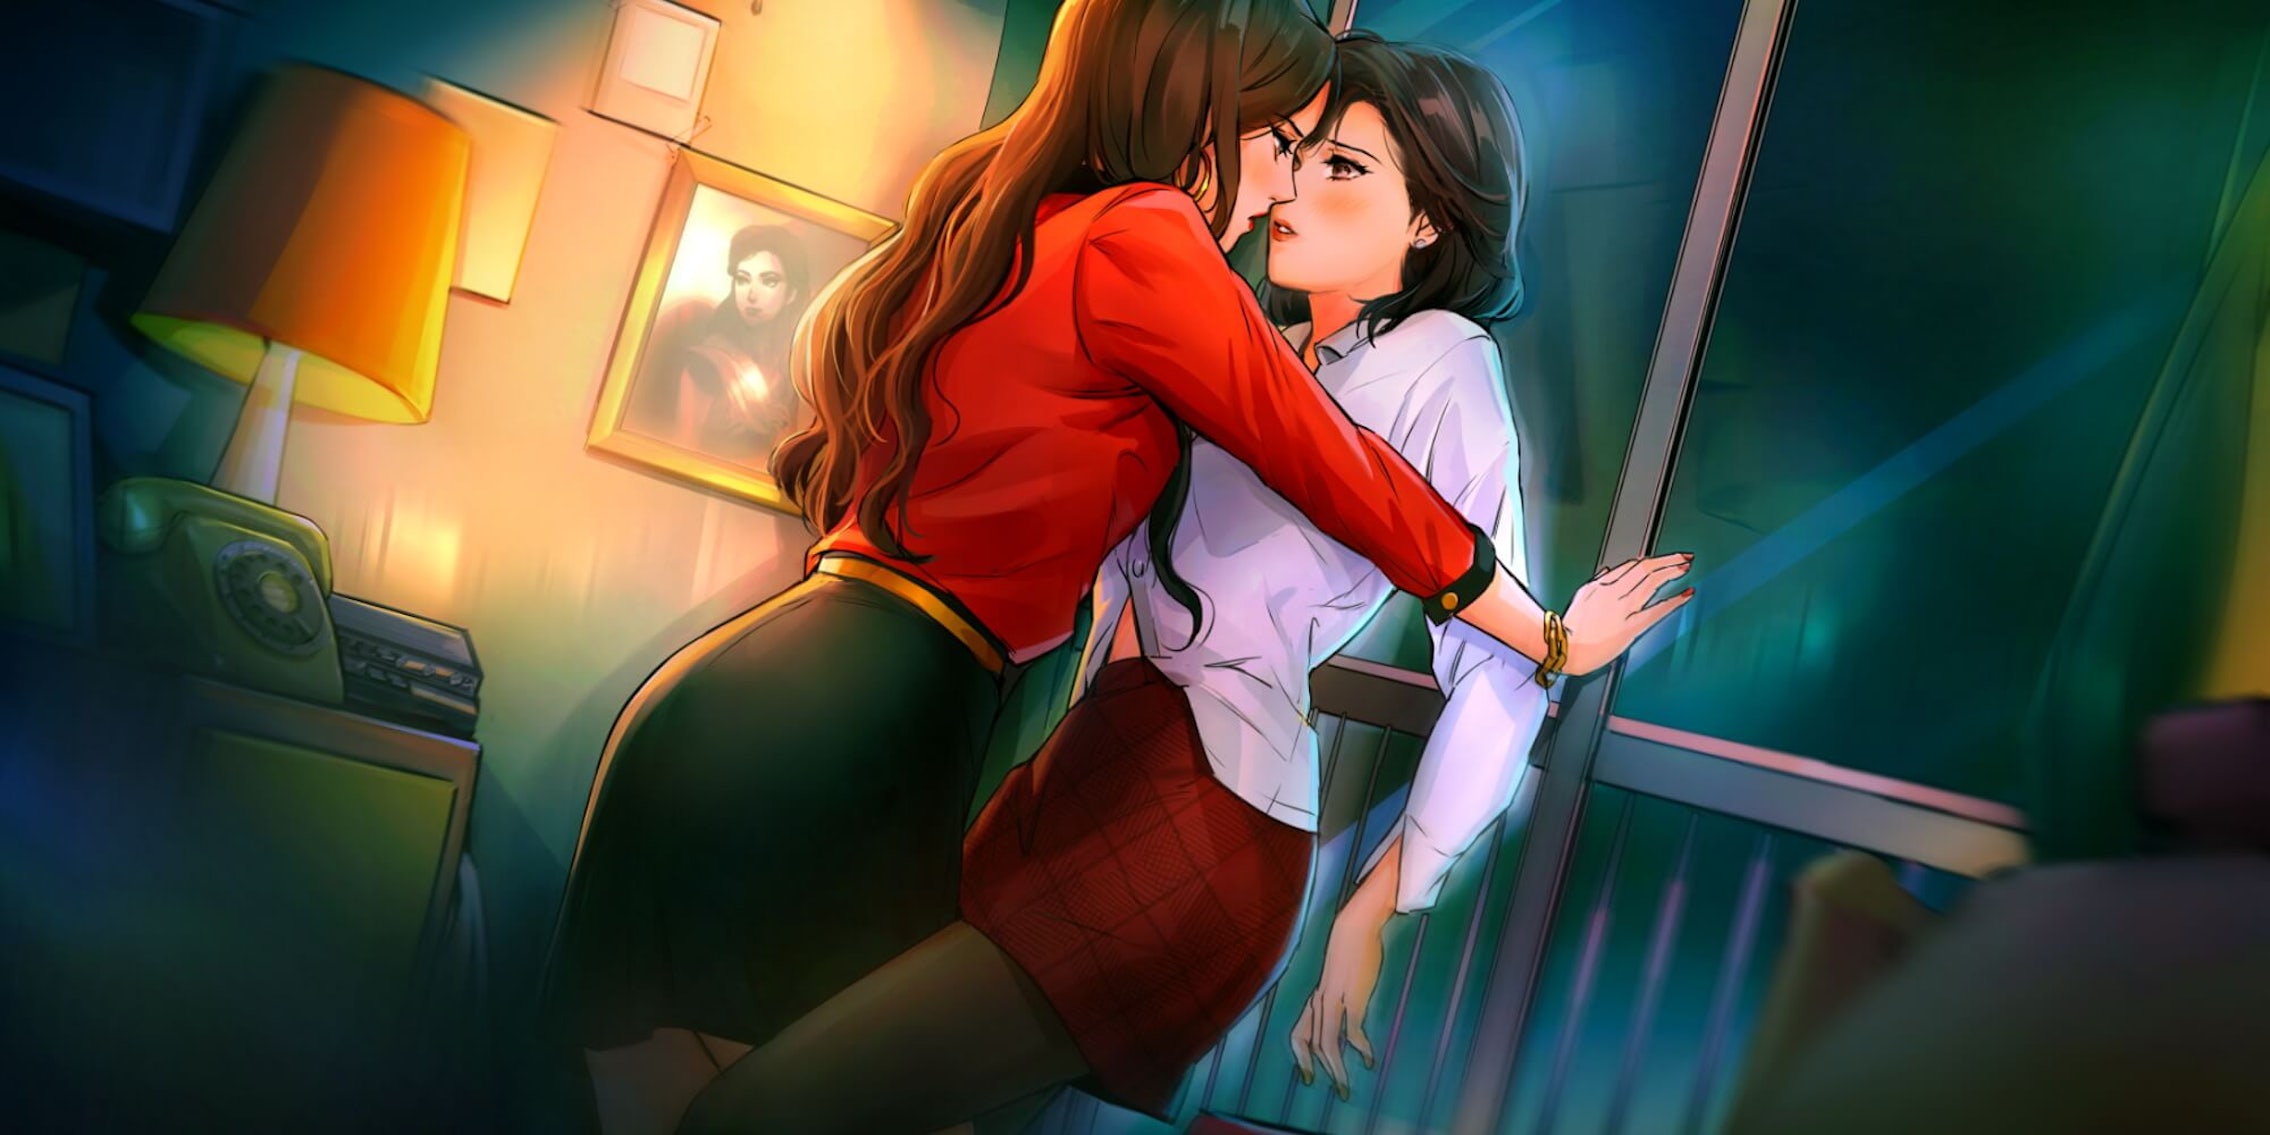 Lesbian Adult Pc Games - A Summer's End: Adult Game Explores Asian Lesbian Life in Hong Kong